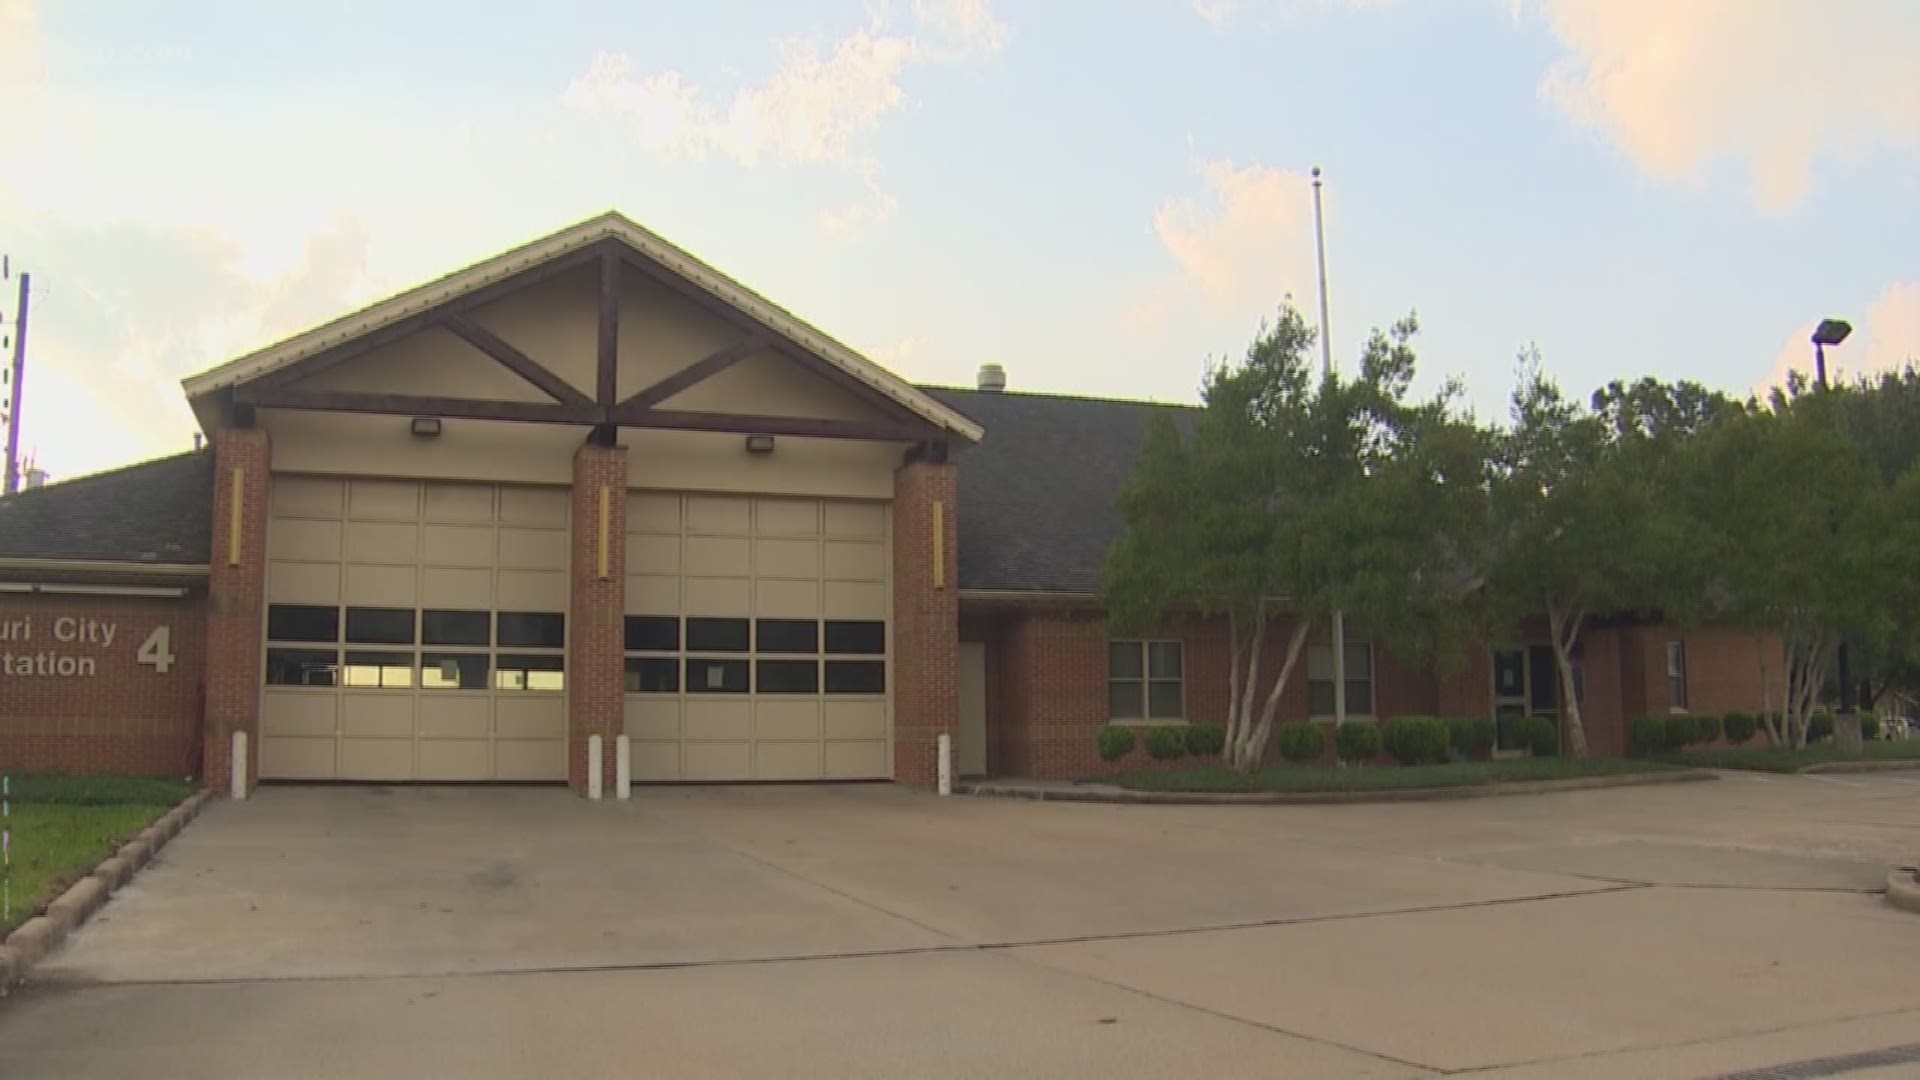 Mold forced a couple of fire stations in Fort Bend county to close so they can be cleaned up. But residents are concerned this could affect response times.